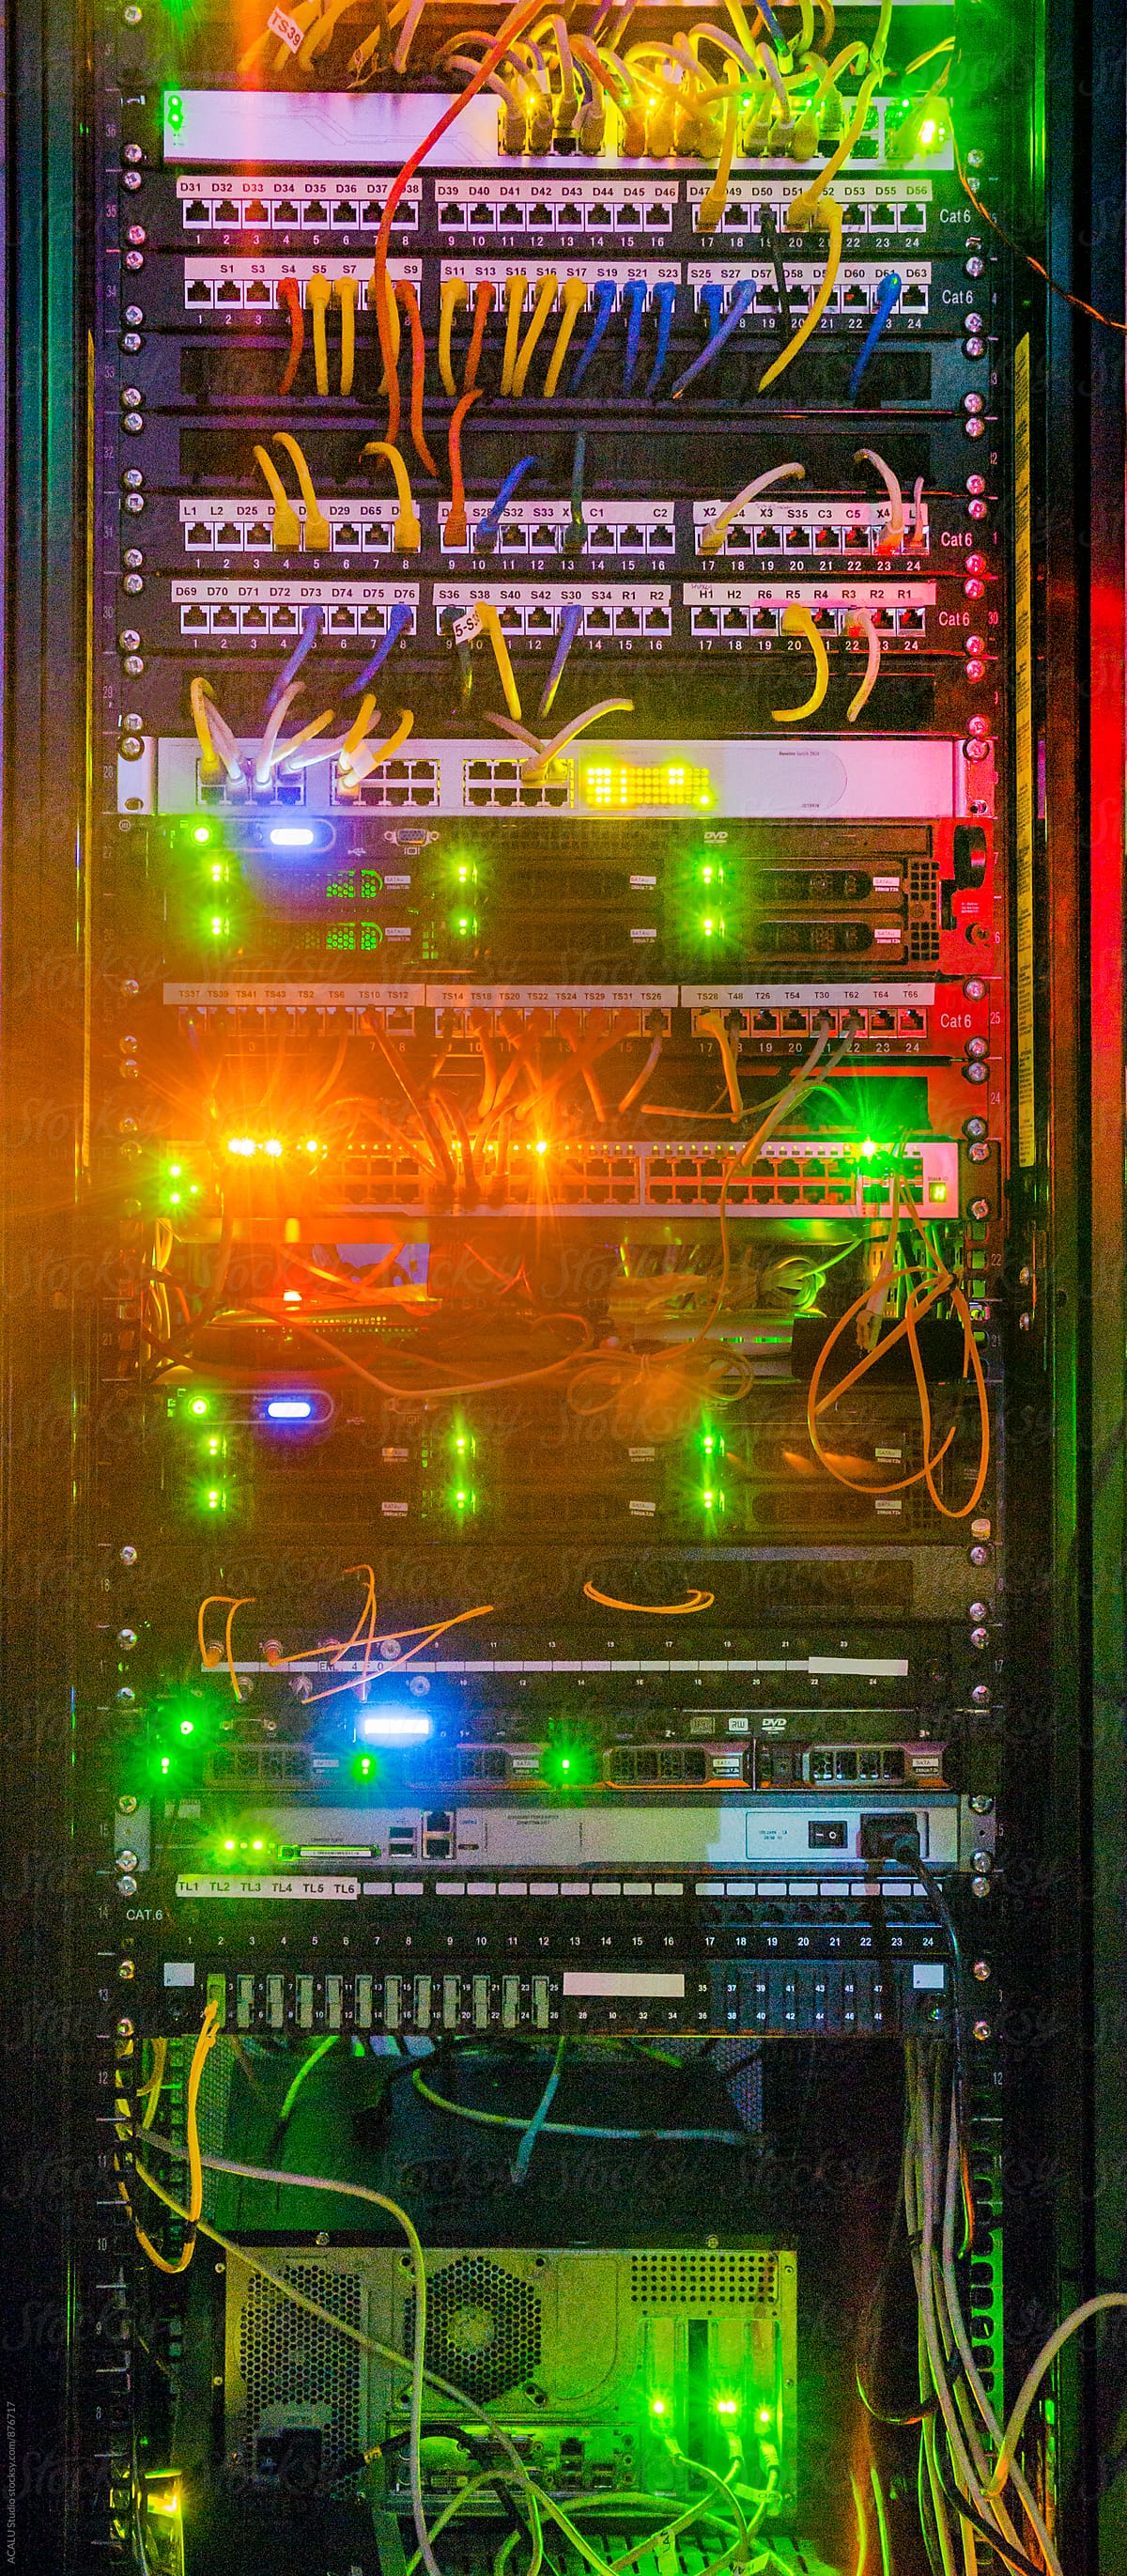 Illuminated telecommunications rack with switches and patch panels